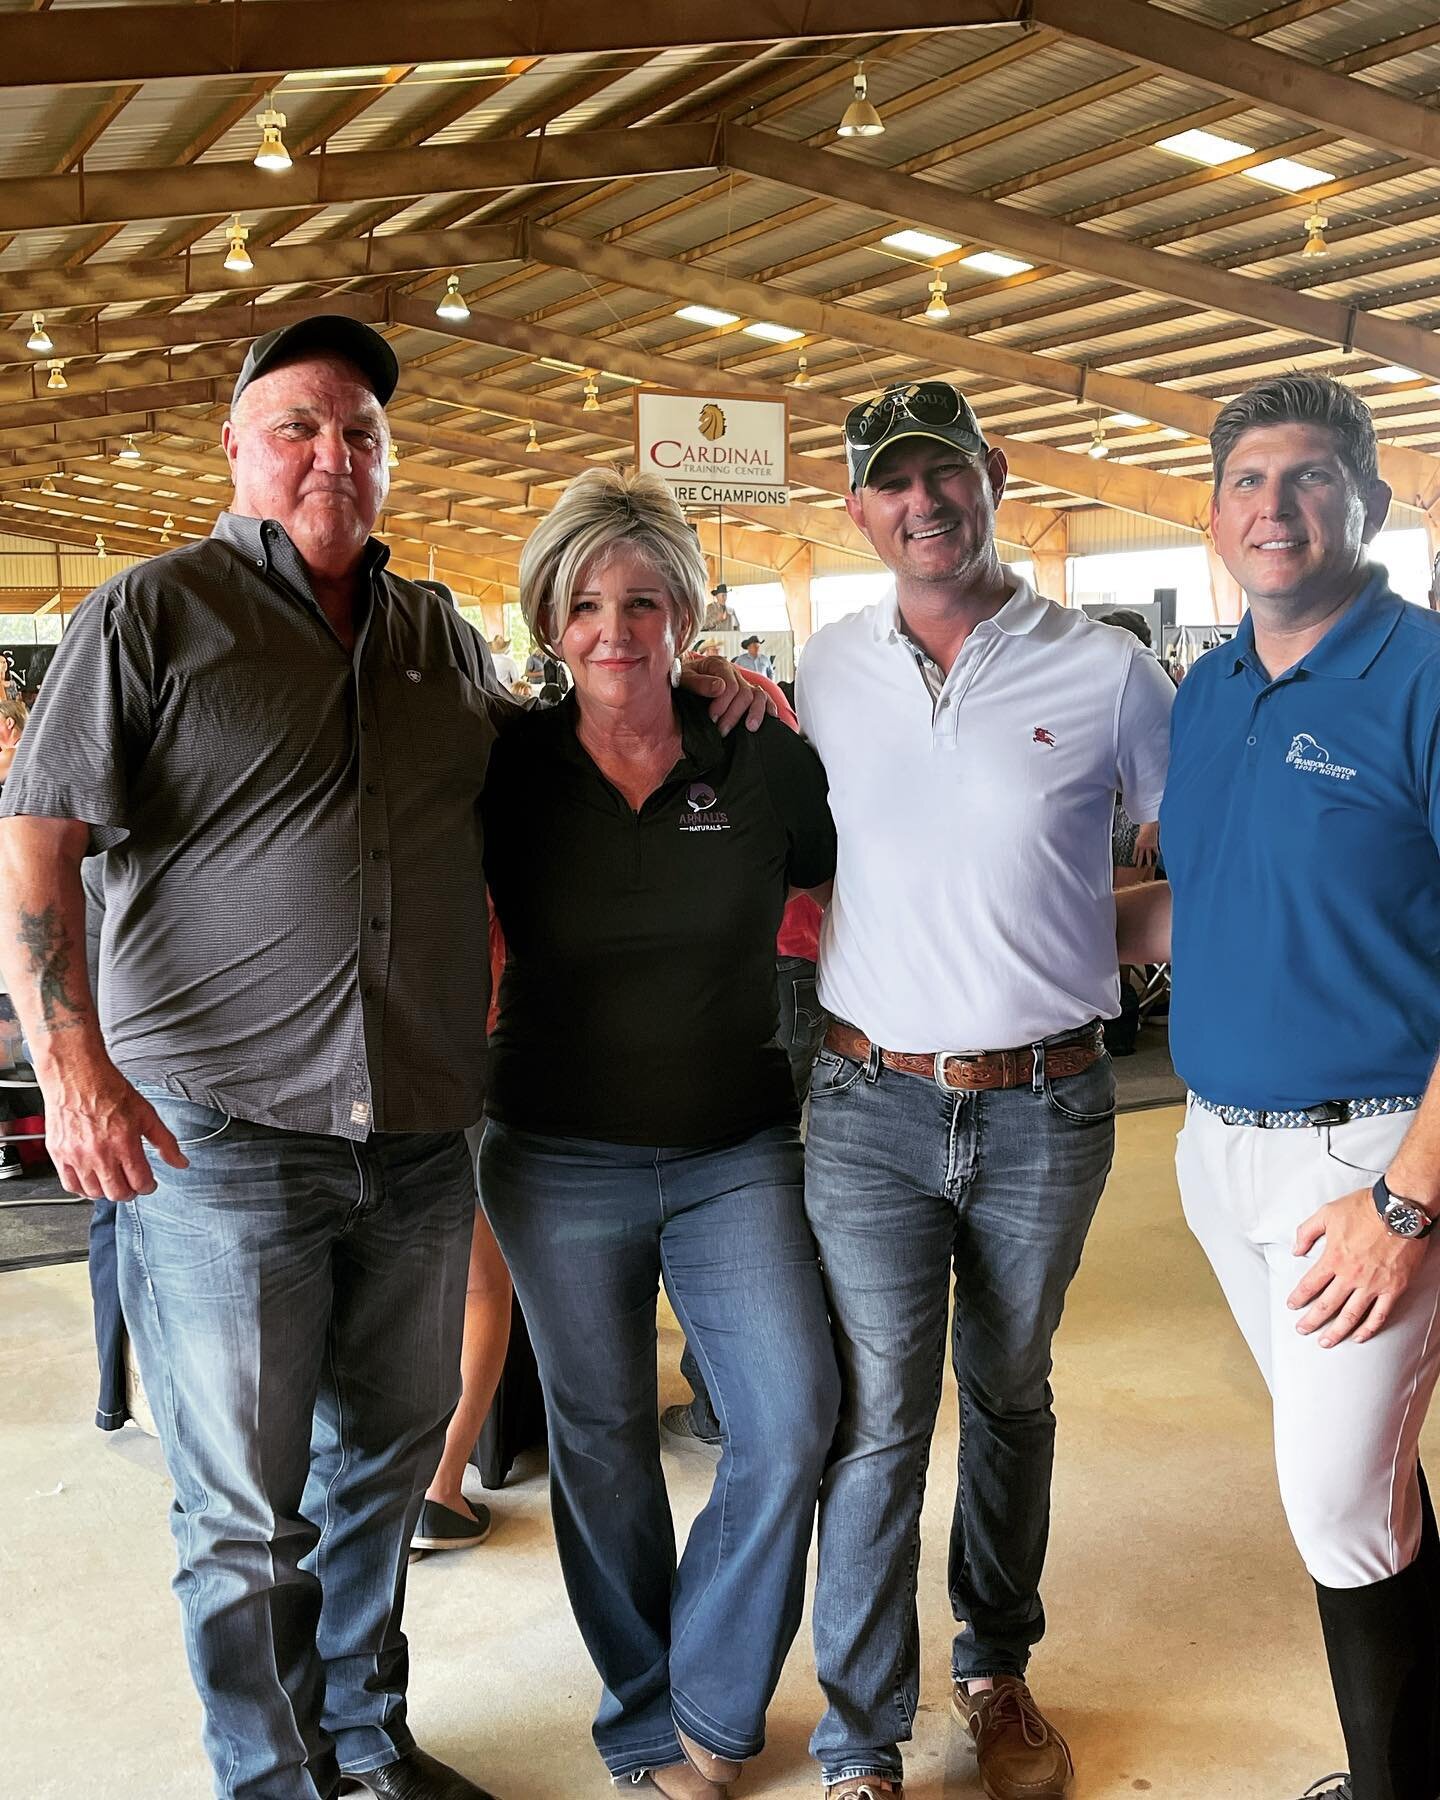 It was wonderful seeing our friends and sponsors @arnallsnaturals at the @cardinalranch reining horses auction. Thank you @slidenstop for the invite and saving us seats! We love spending time with you and Craig.